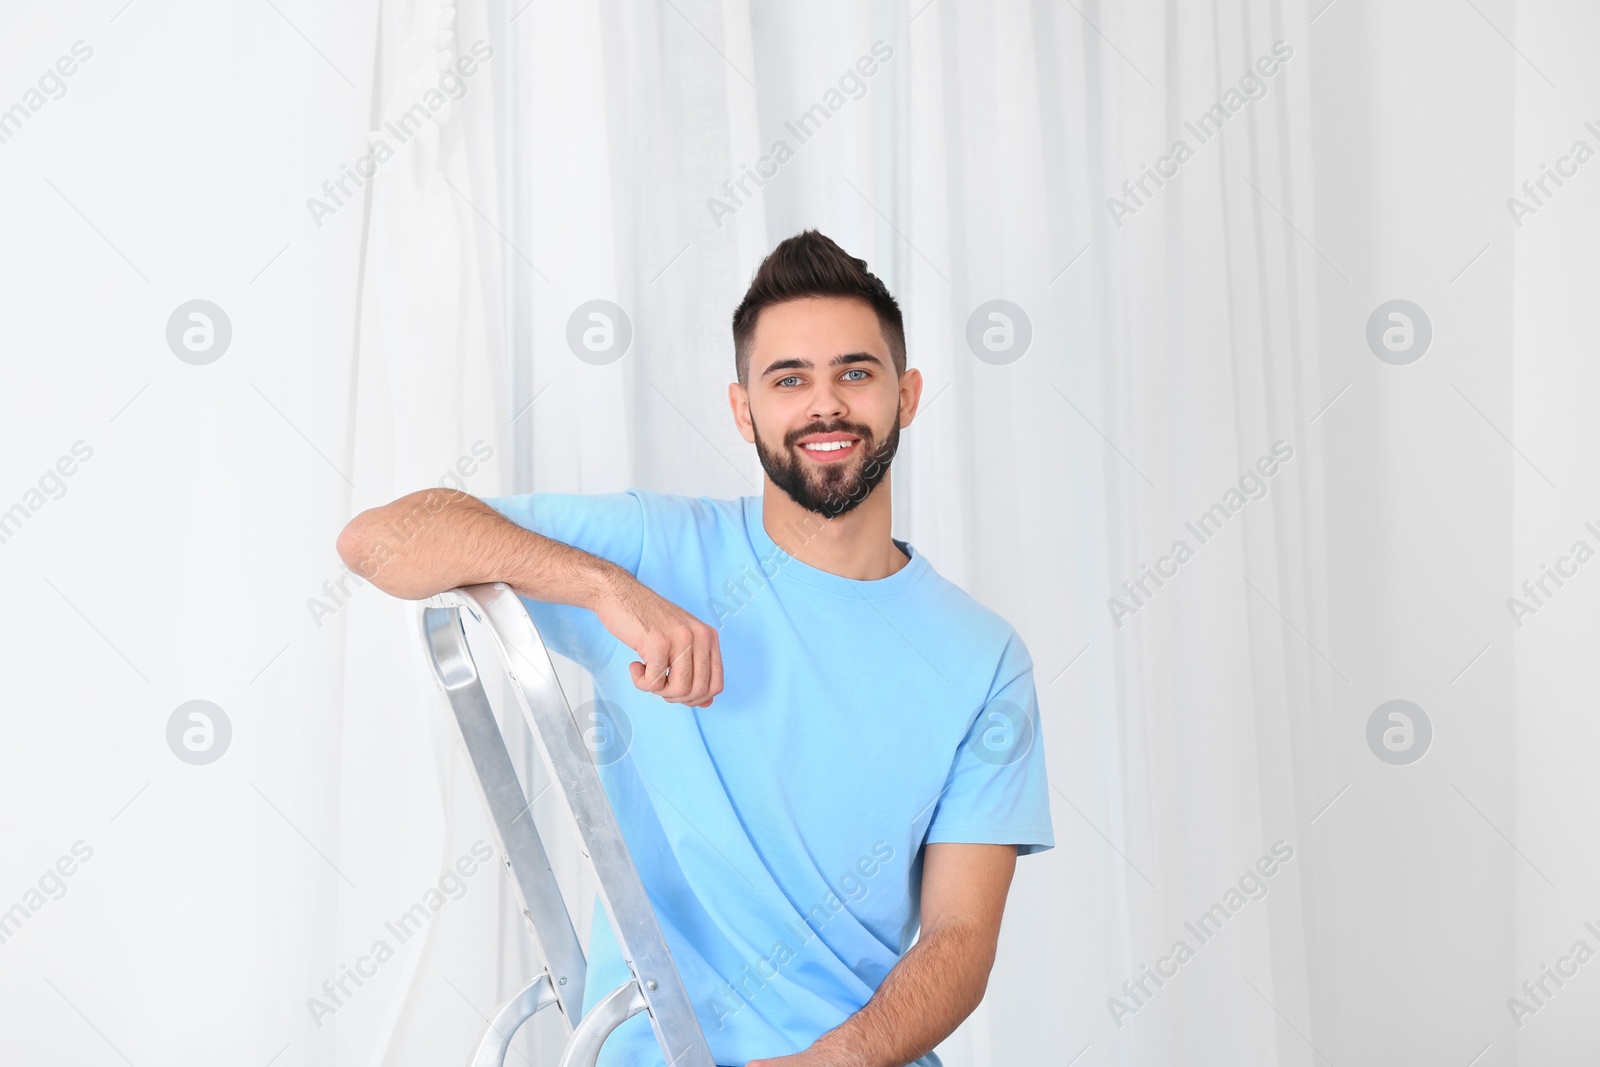 Photo of Young man sitting on stepladder near window with curtain in room